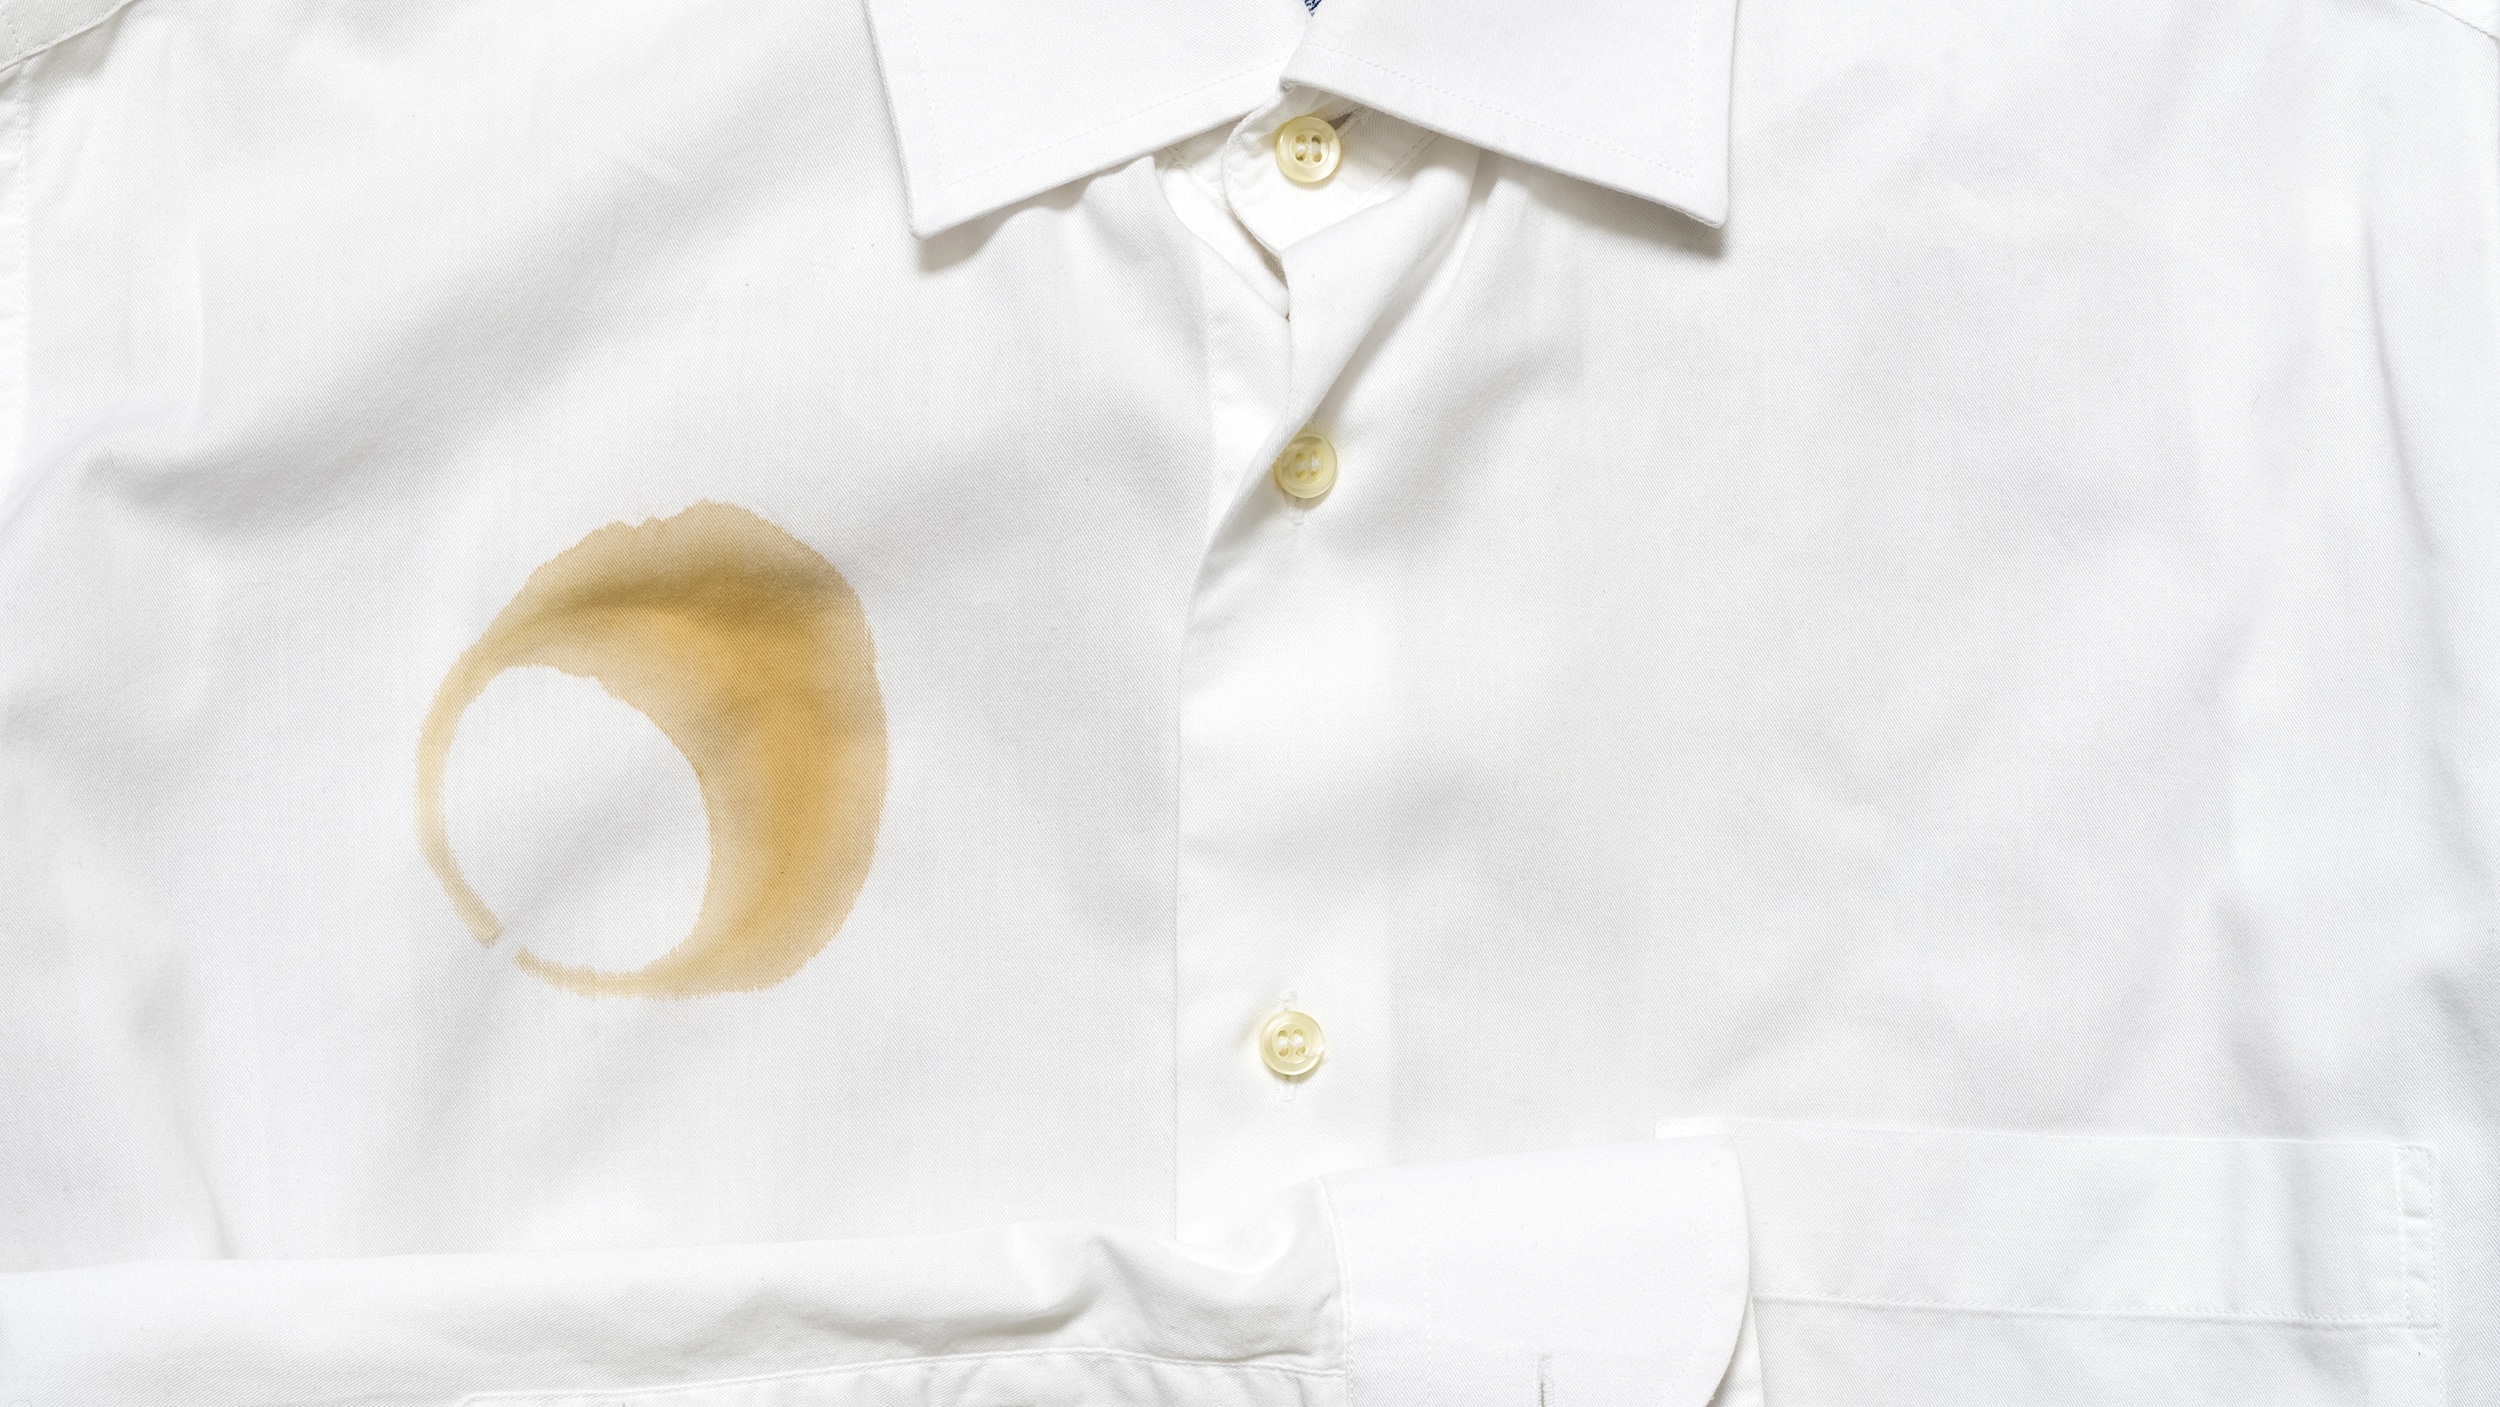 Why Does Coffee Stain Almost Anything and How to Remove Stains?